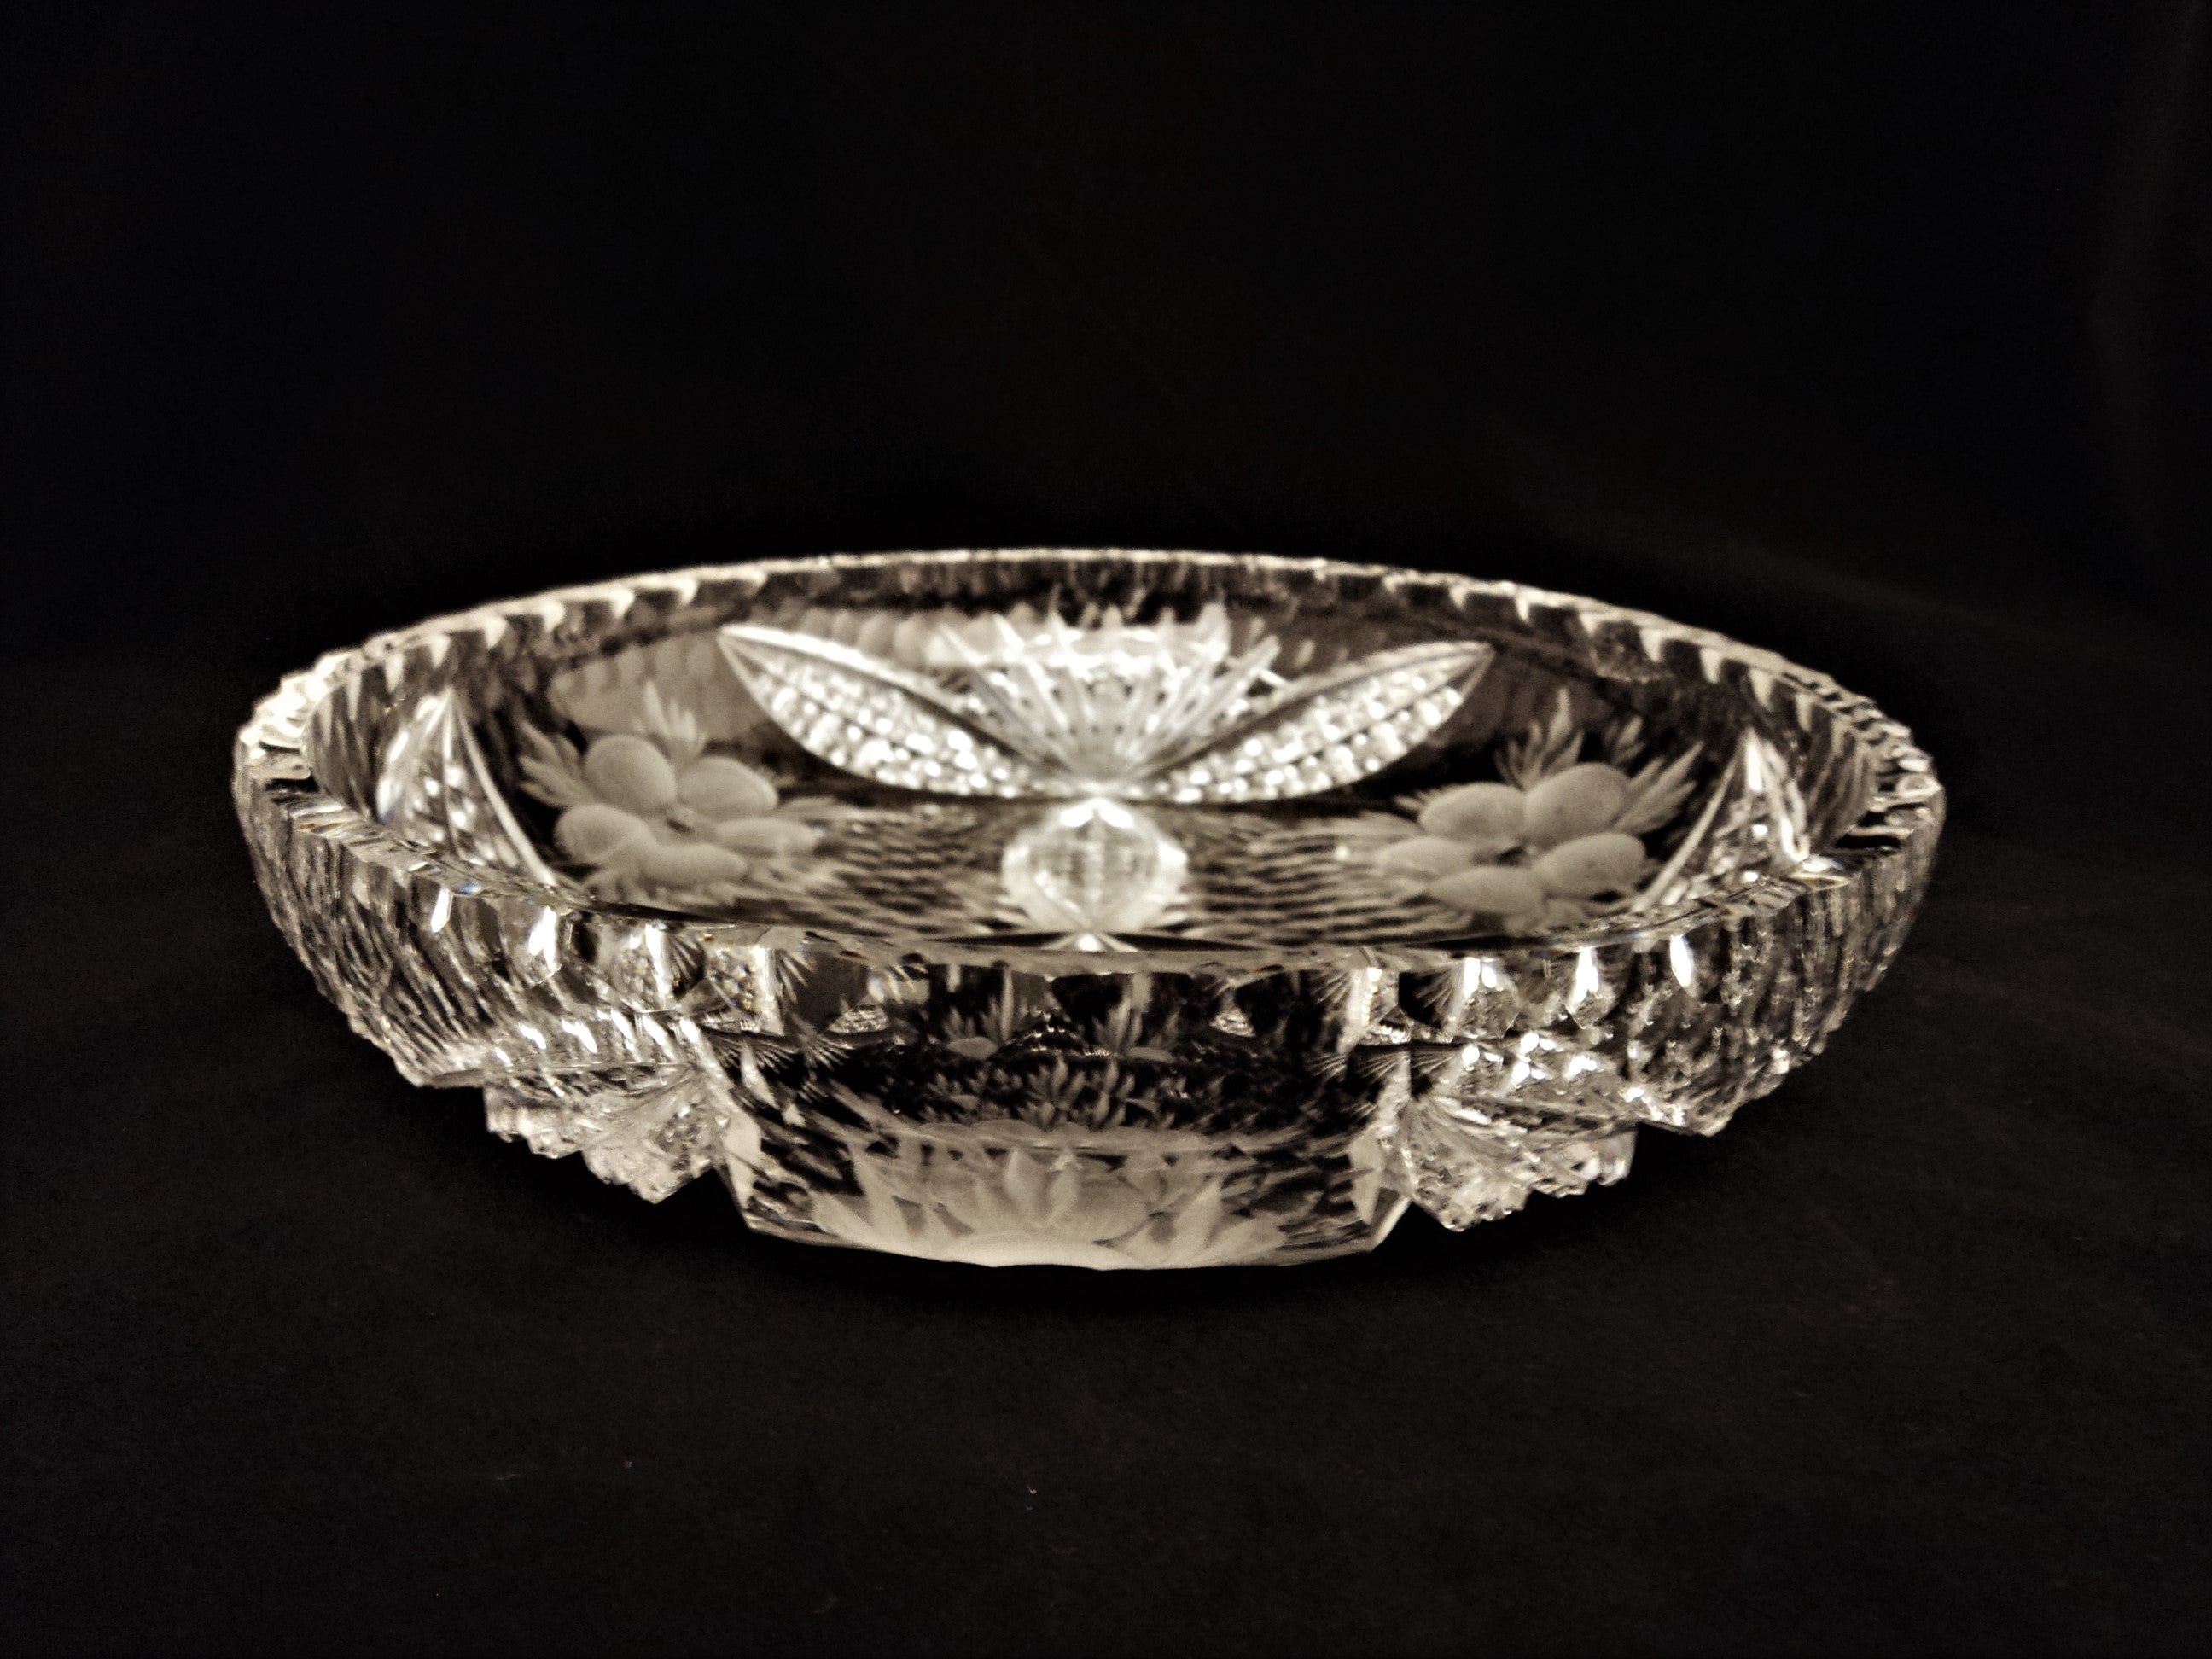 Vintage Crystal Bowl with Etched Flowers